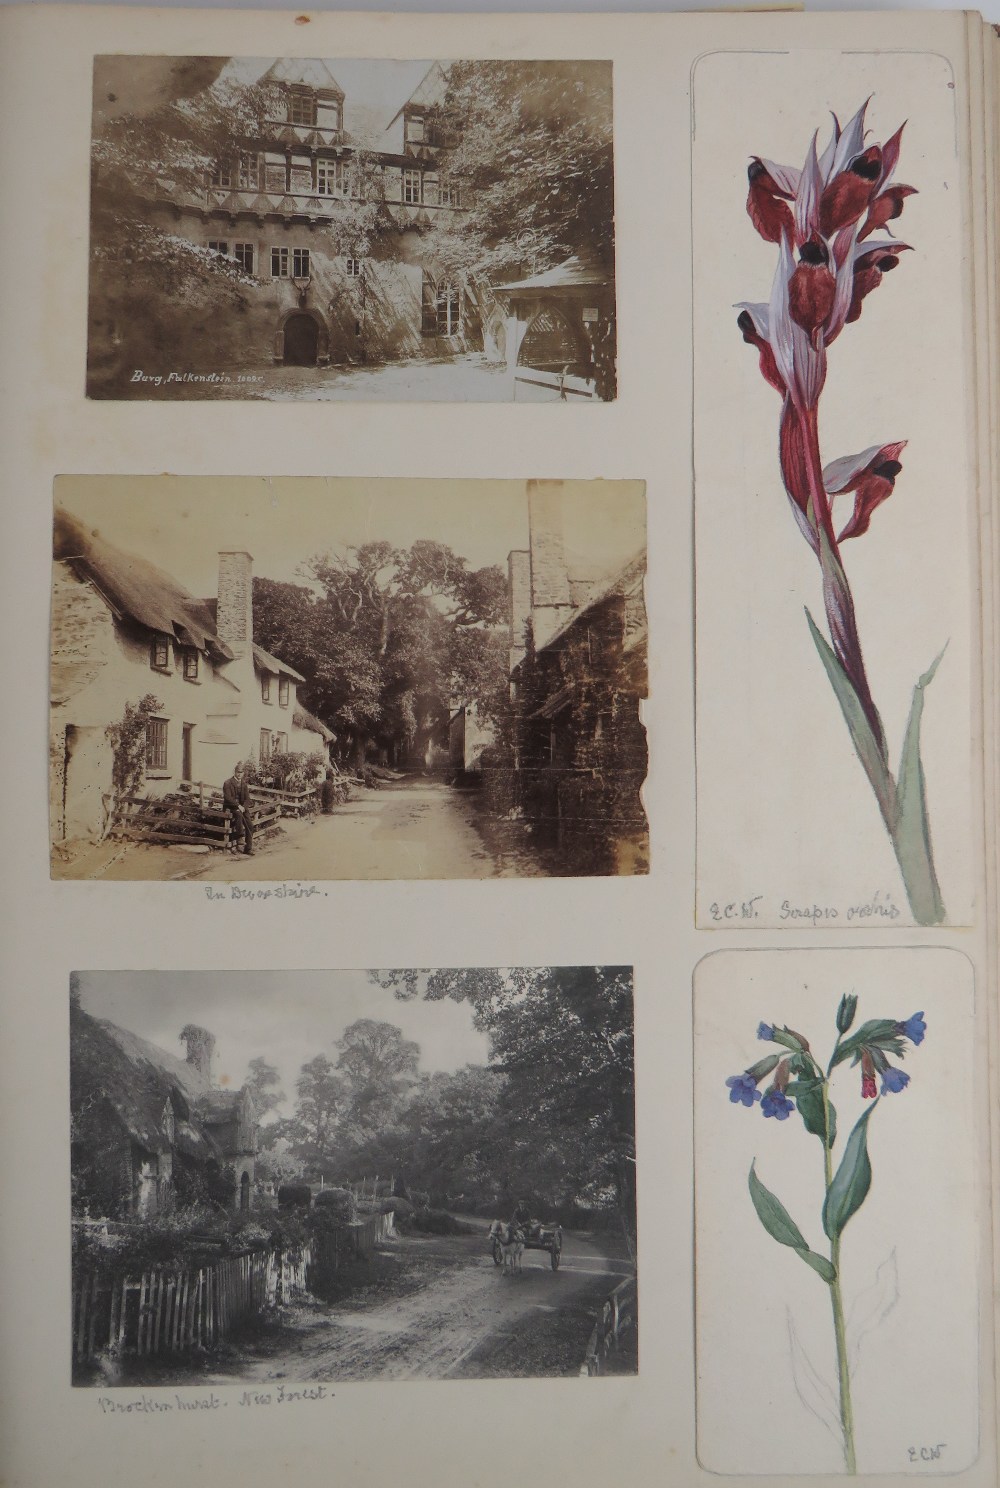 Important Irish Family Sketch Book Co. Wicklow [Wynne Family Sketchbook] An extensive folio